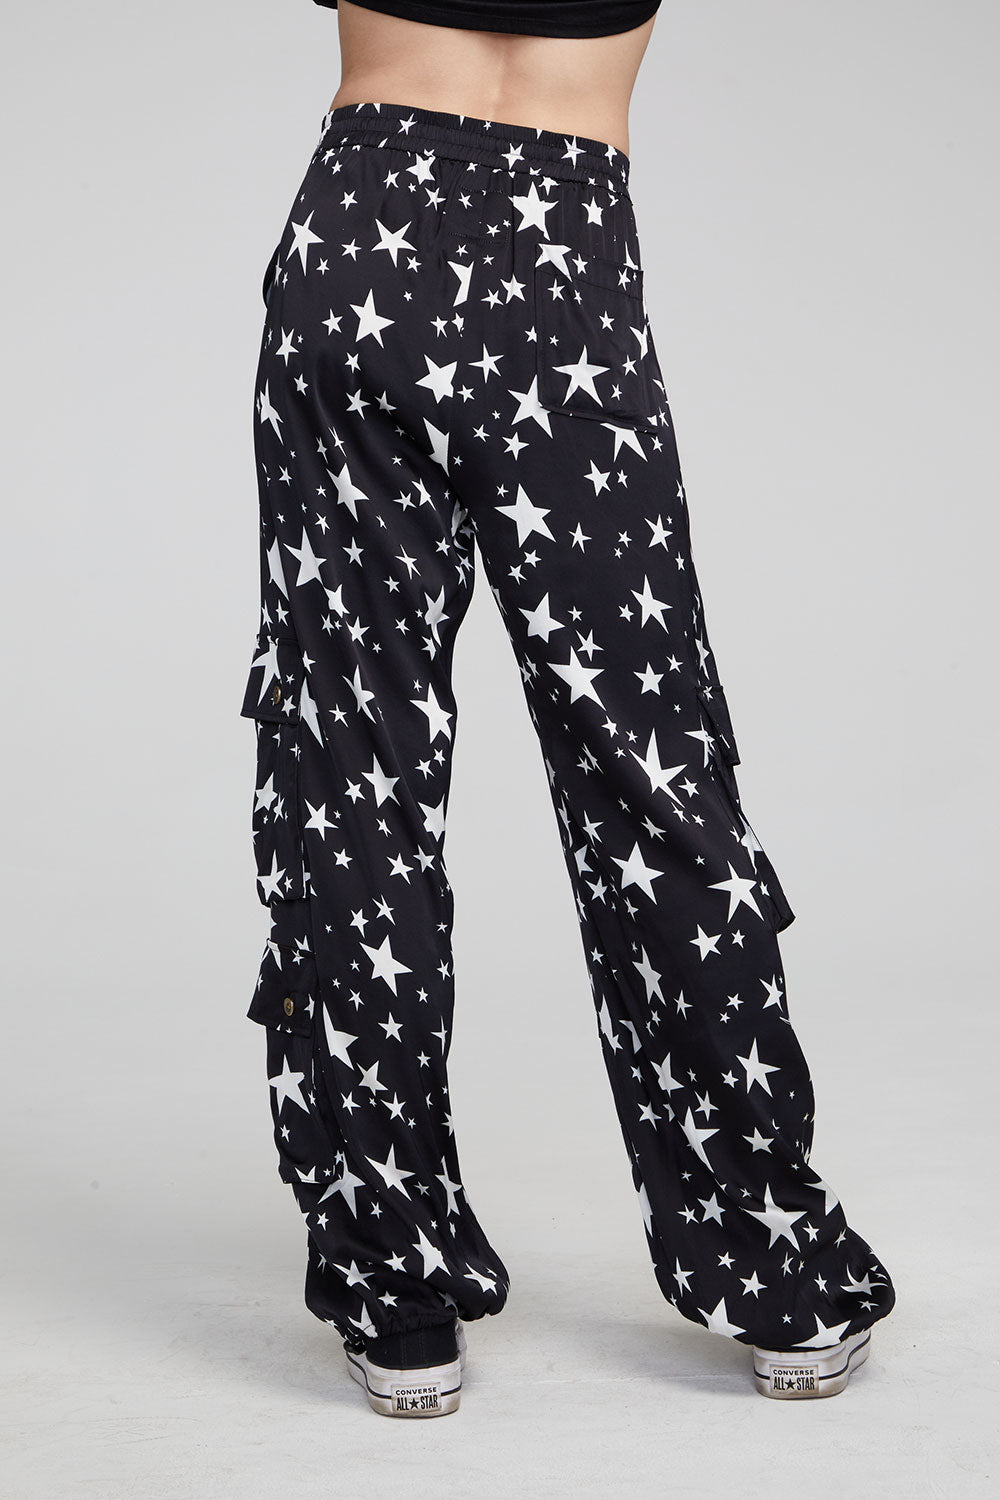 Billyy Walk of Fame Trousers WOMENS chaserbrand